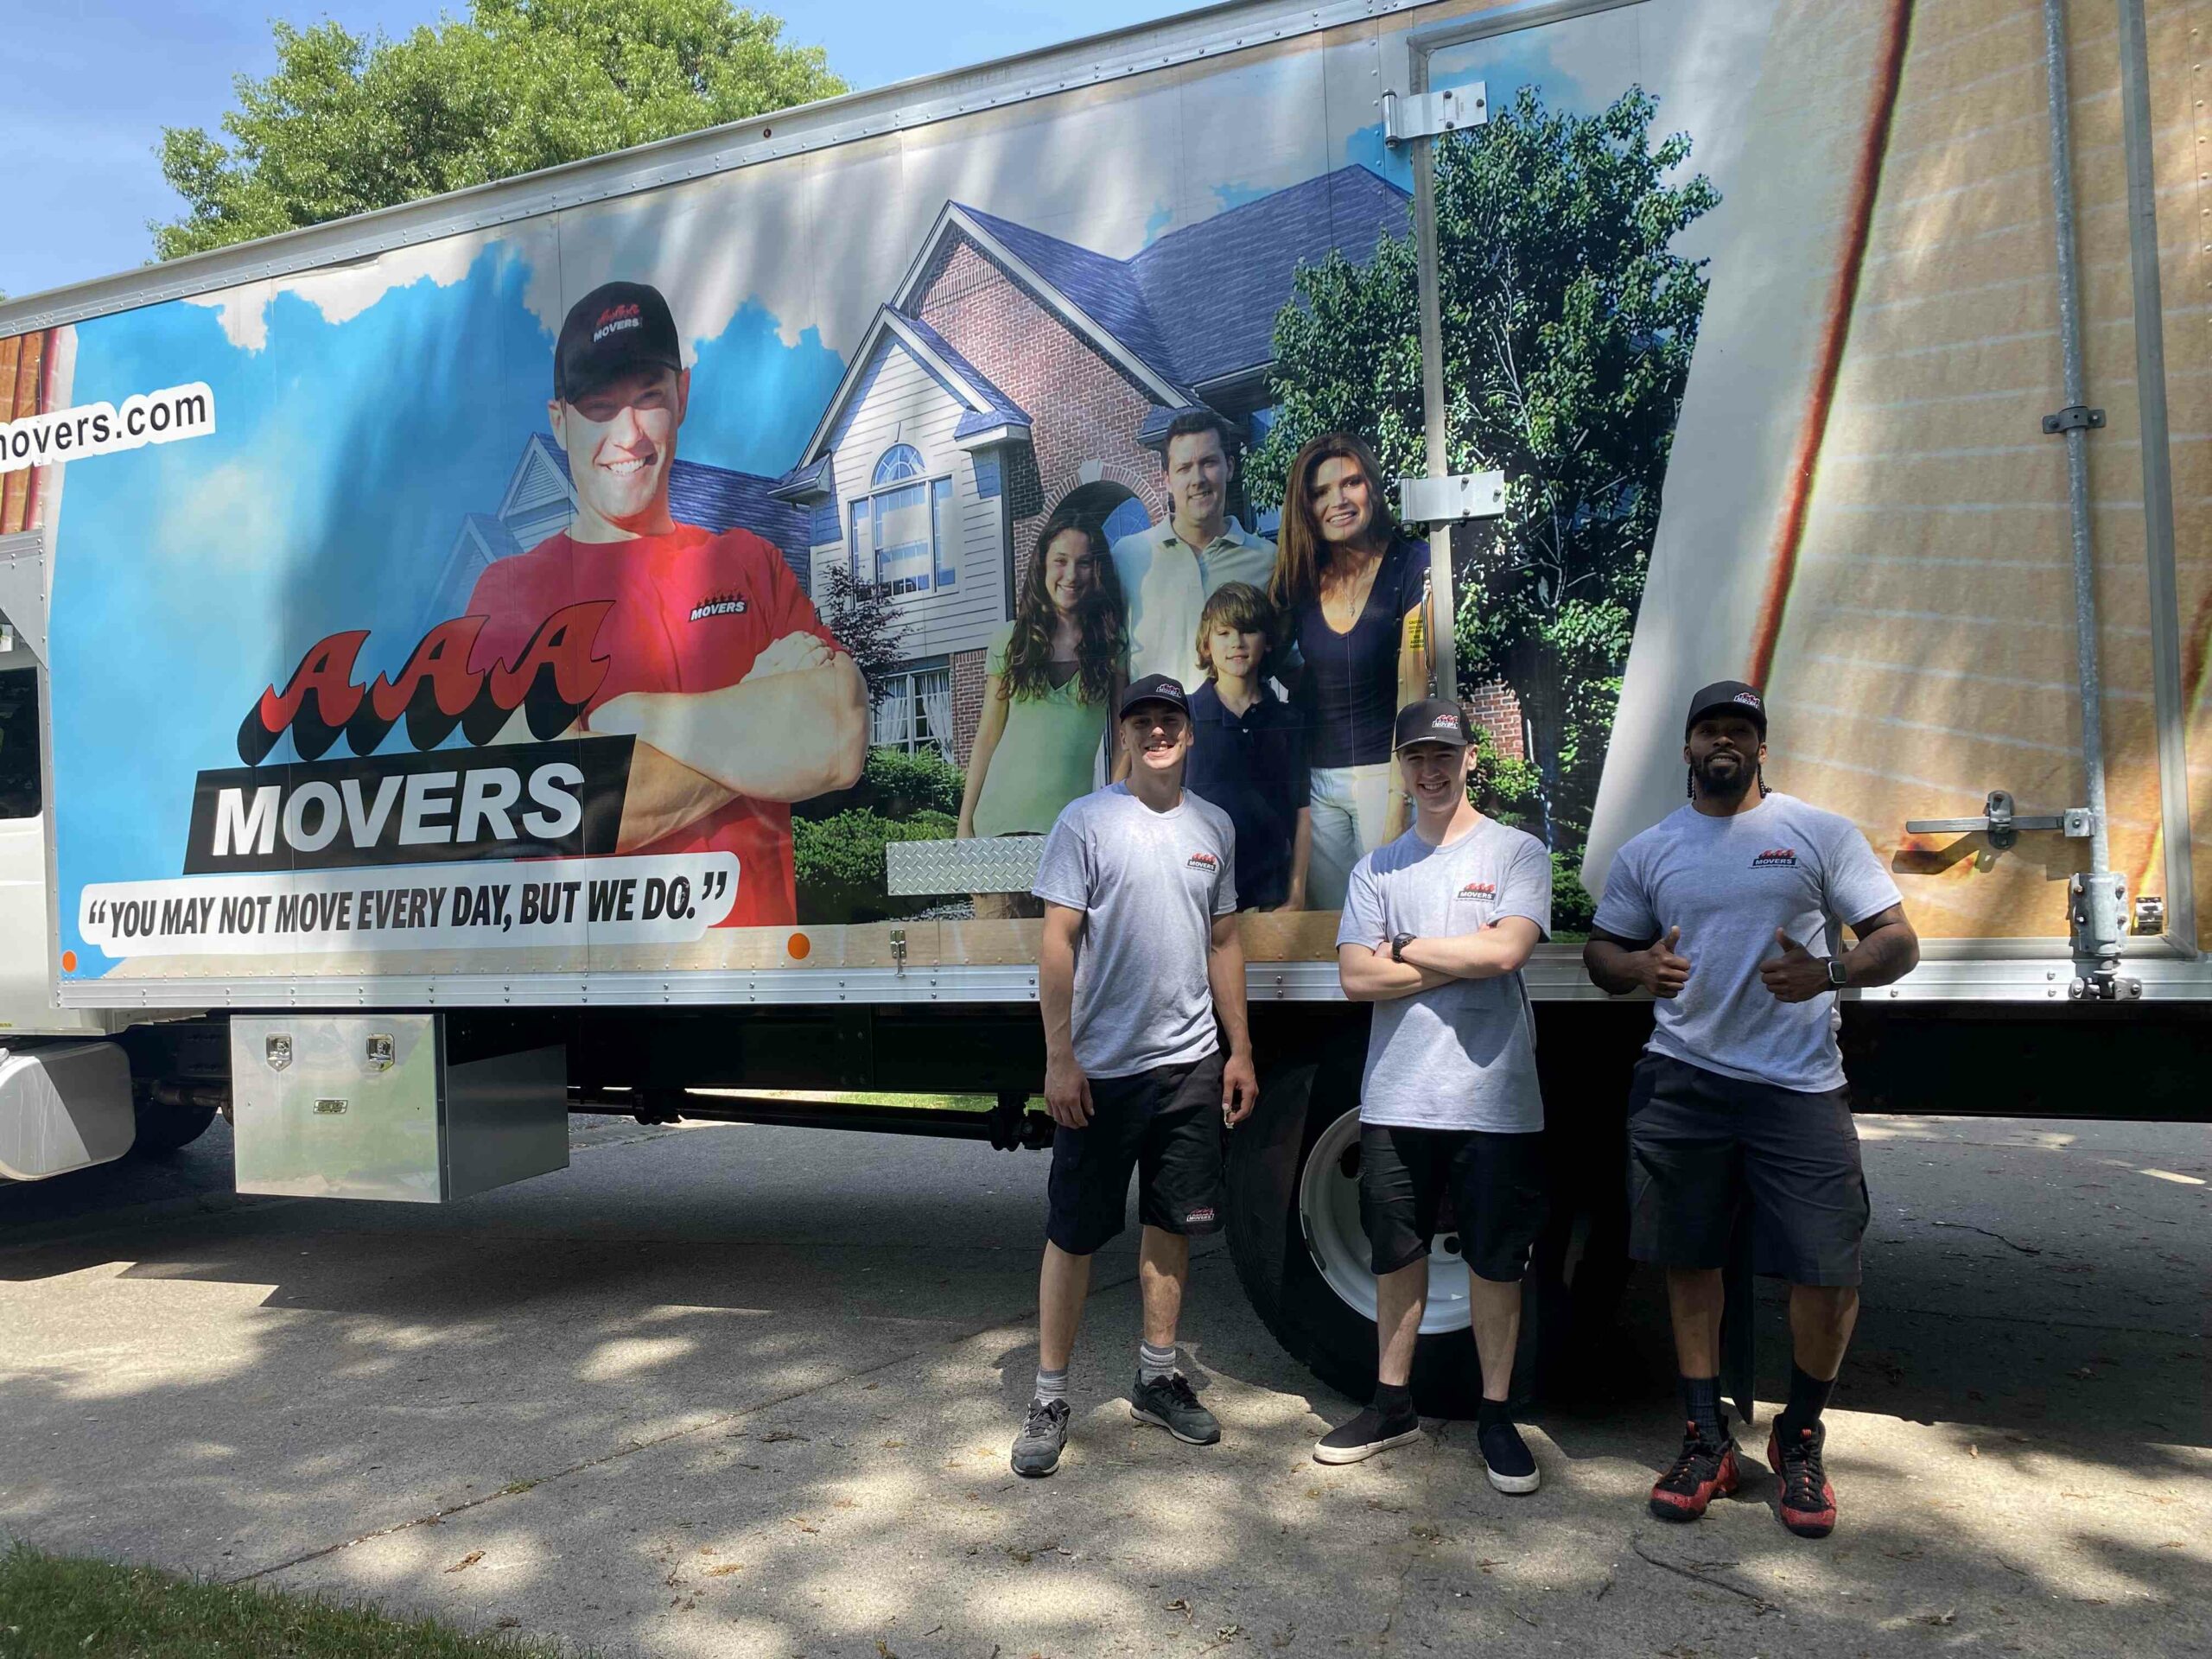 AAA Movers moving crew posing in front of their moving truck